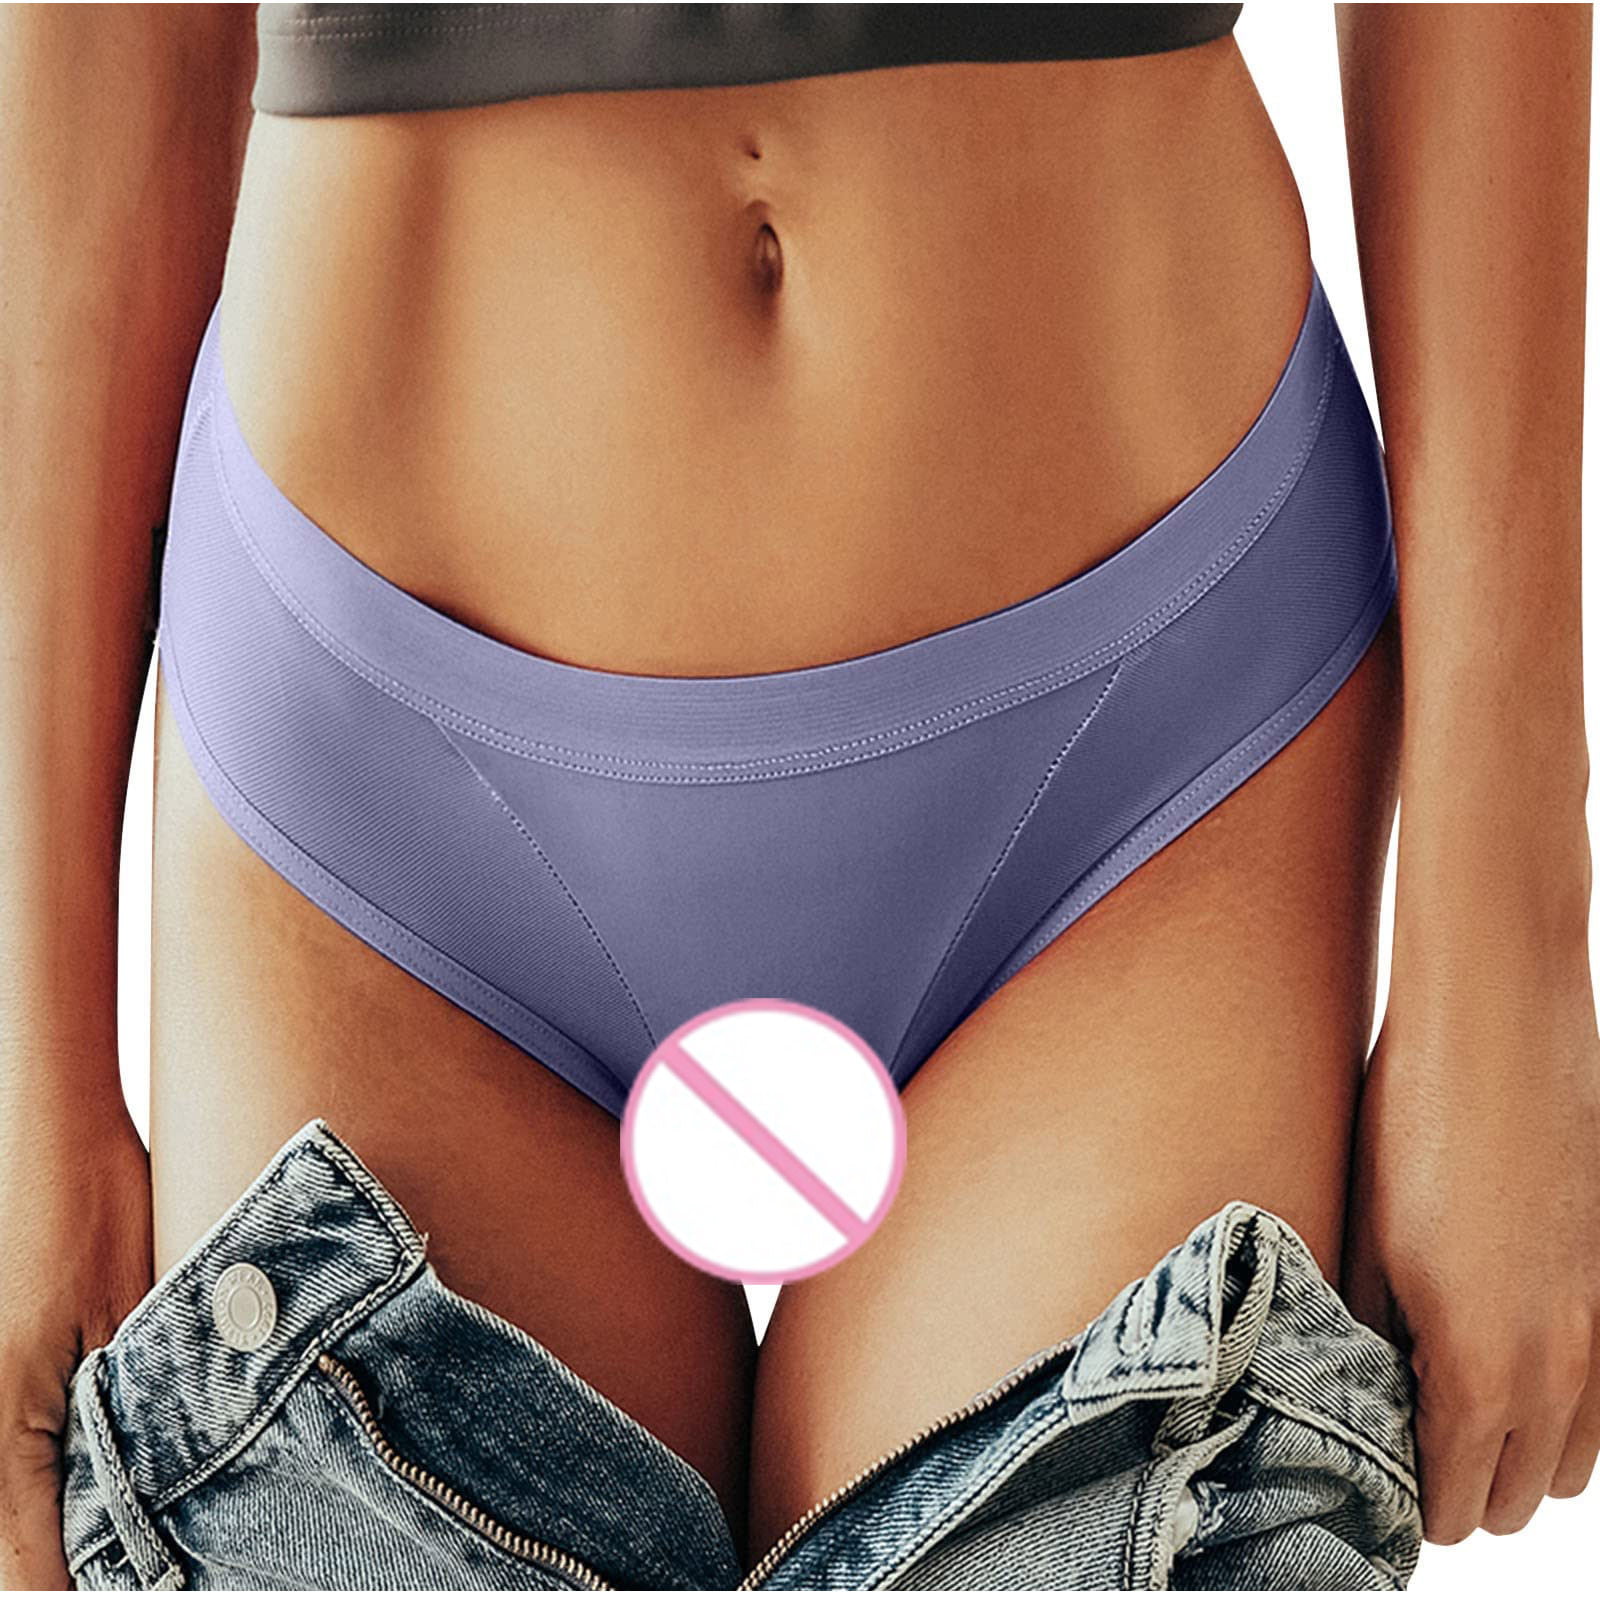 HUPOM Knix Underwear Panties In Clothing Briefs Leisure None